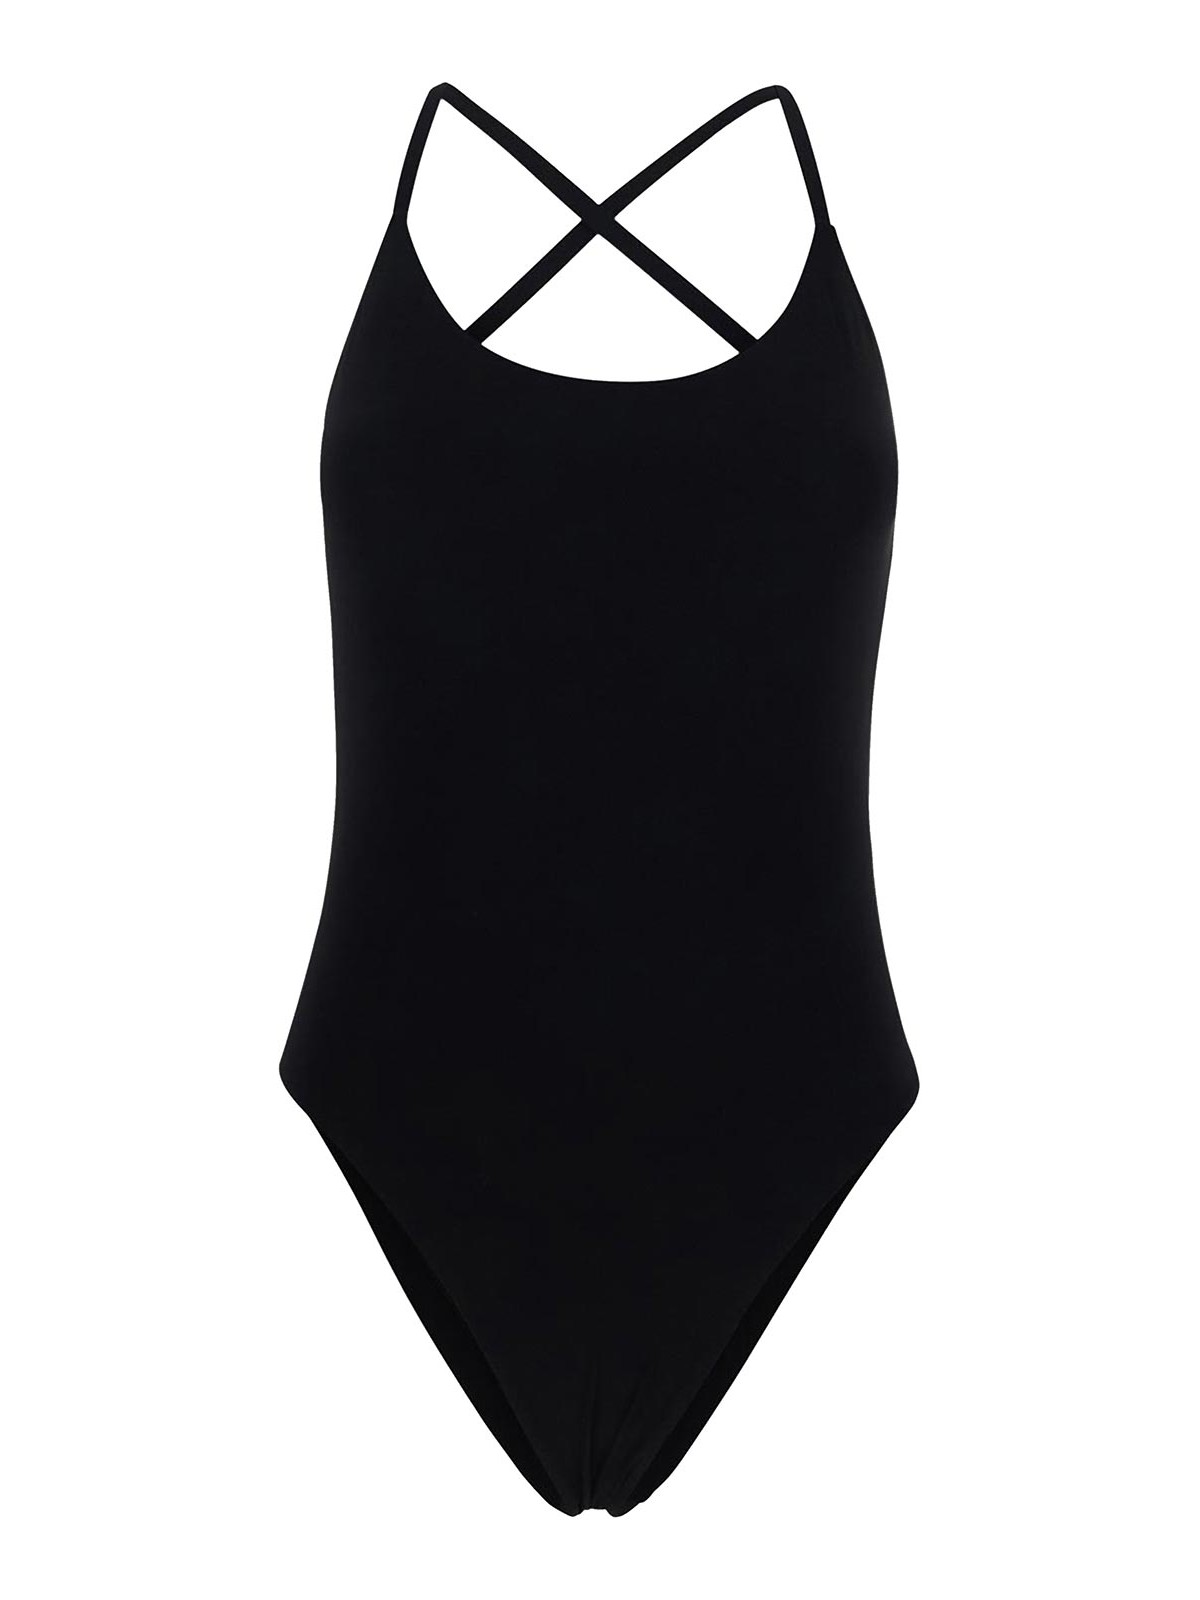 One-piece Lido - Black one-piece - UNOBLACK | Shop online at THEBS [iKRIX]